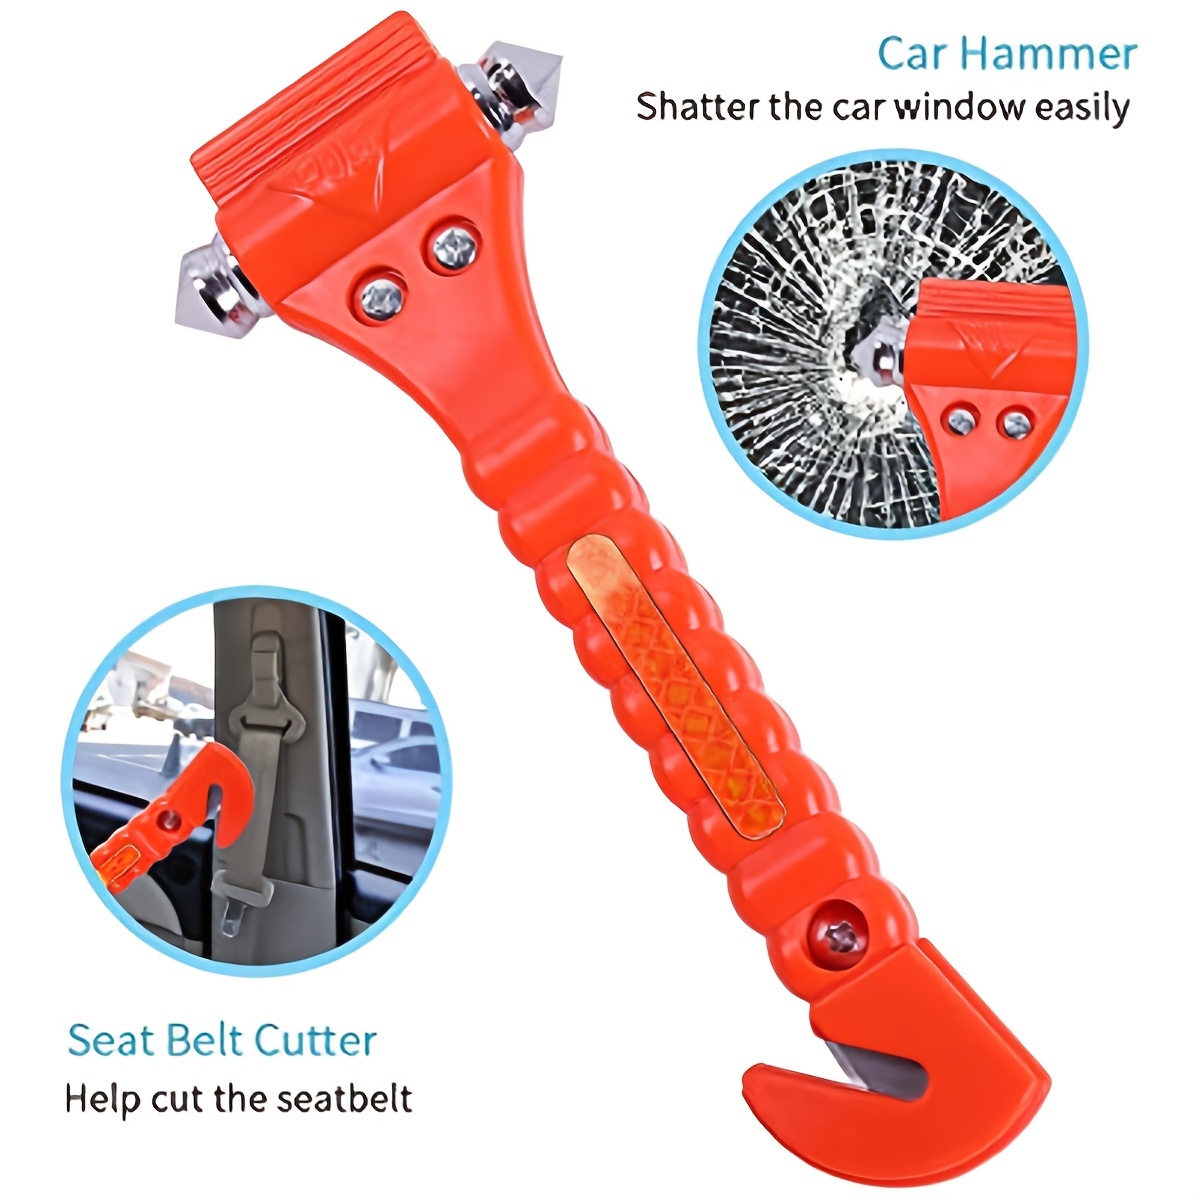 Be Prepared For Emergencies: Car Escape Hammer With Window Breaker, Seat  Belt Cutter & Reflective Tape